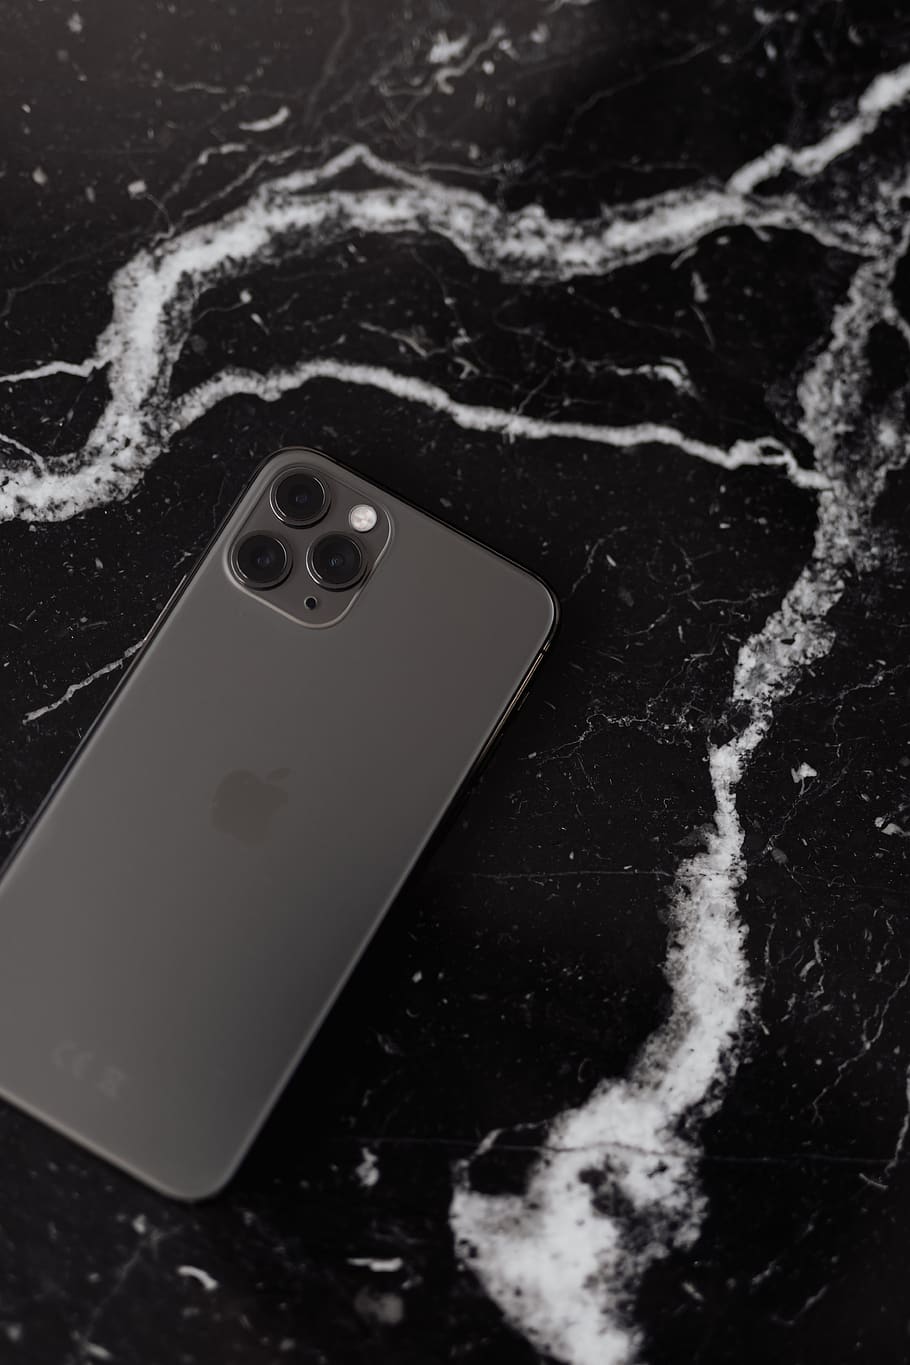 iphone 11 pro, iPhone 11, mobile, mobile phone, space gray, tech, technology, phone, marble, stone